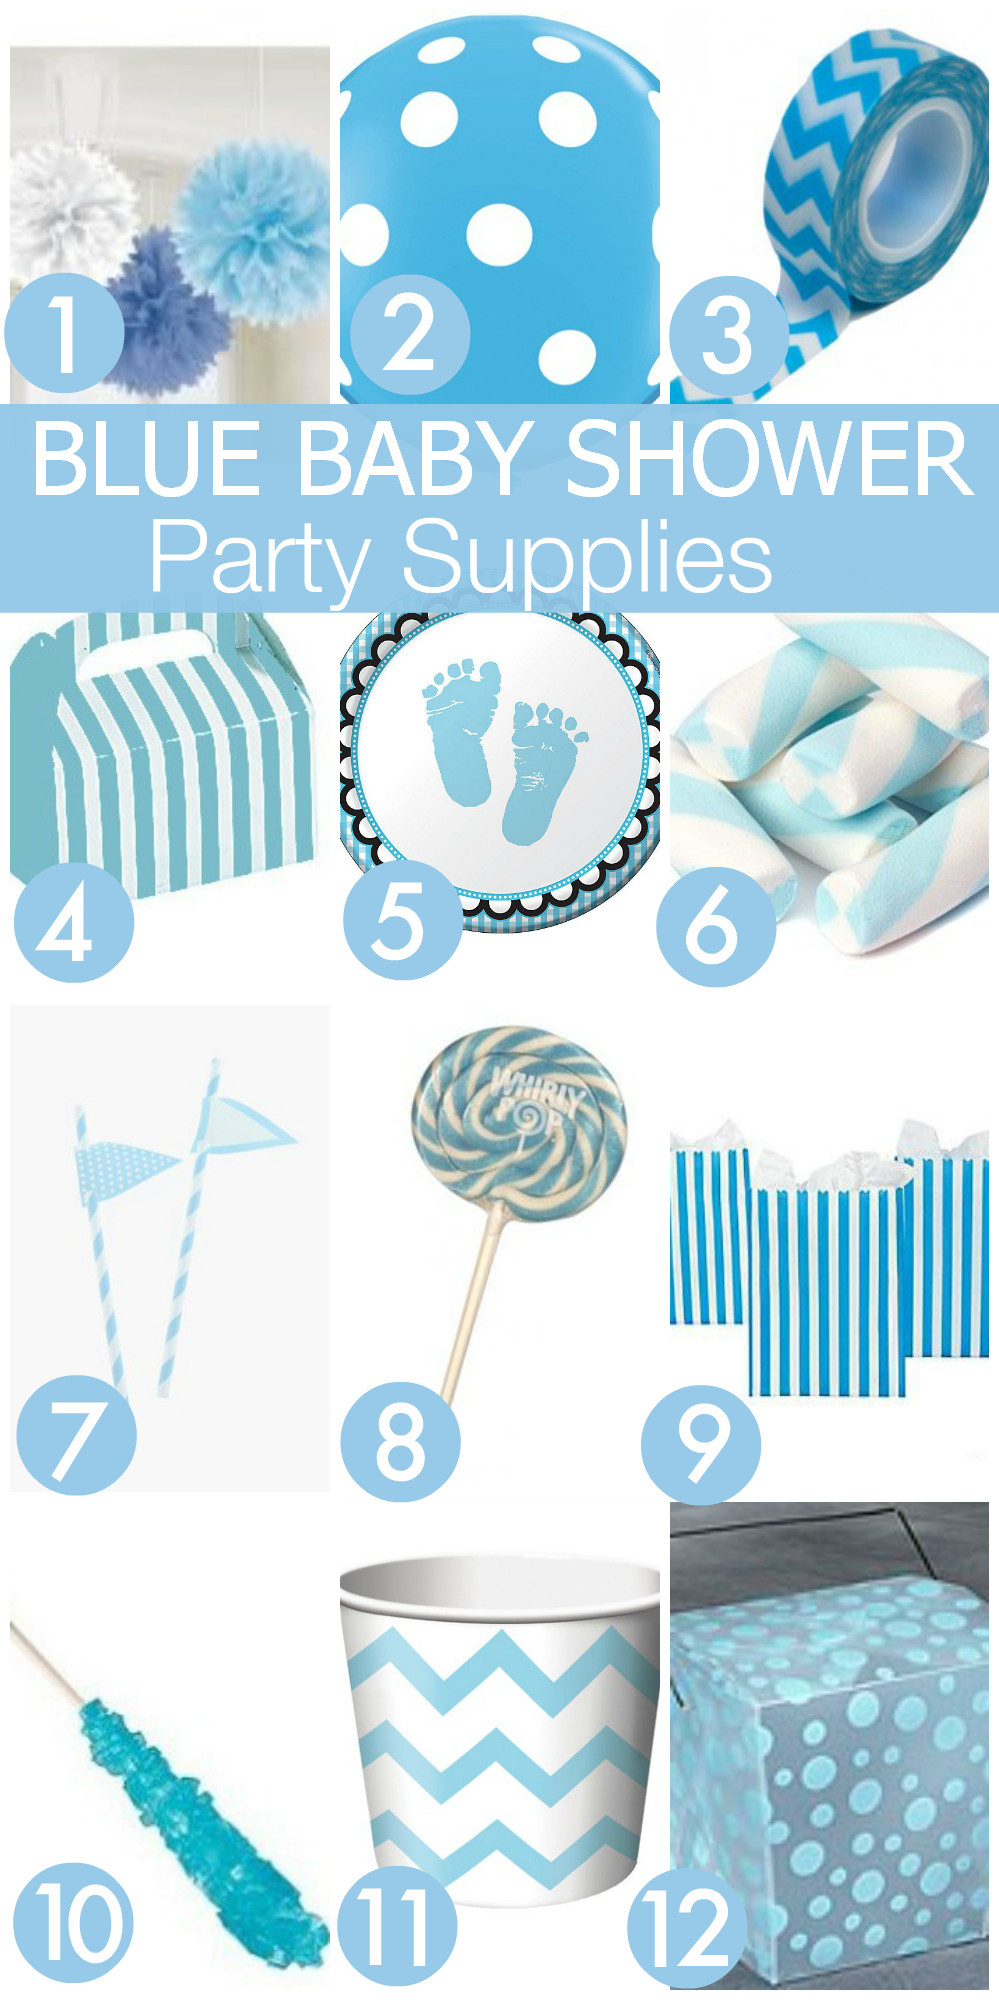 Party Store Baby Shower
 7 Must Haves for Your Blue Baby Shower